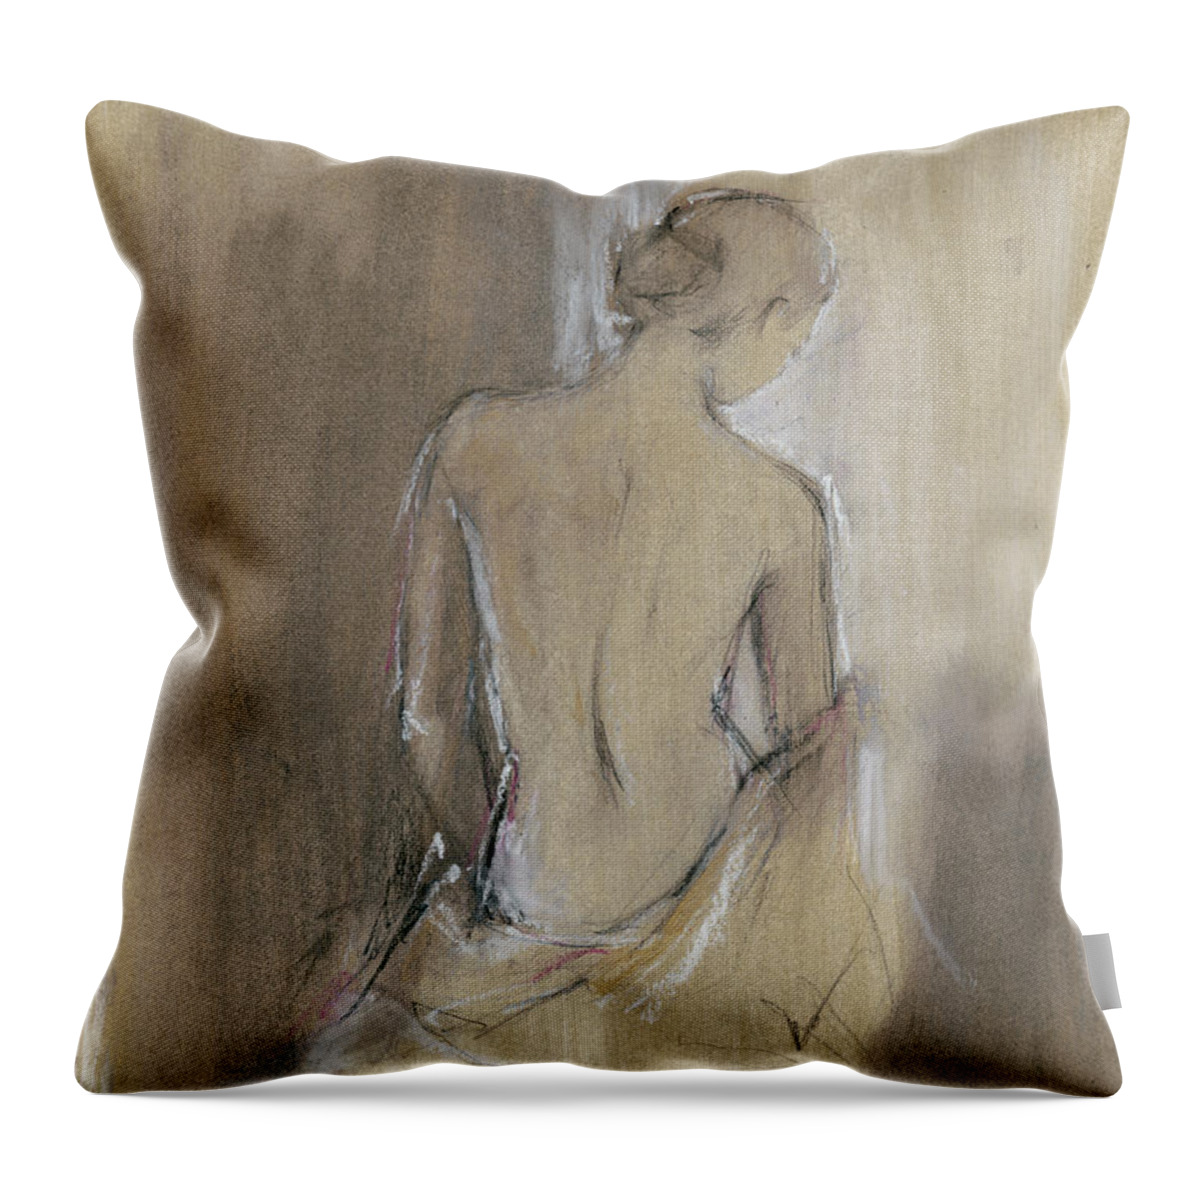 Figurative Throw Pillow featuring the painting Contemporary Draped Figure II #2 by Ethan Harper